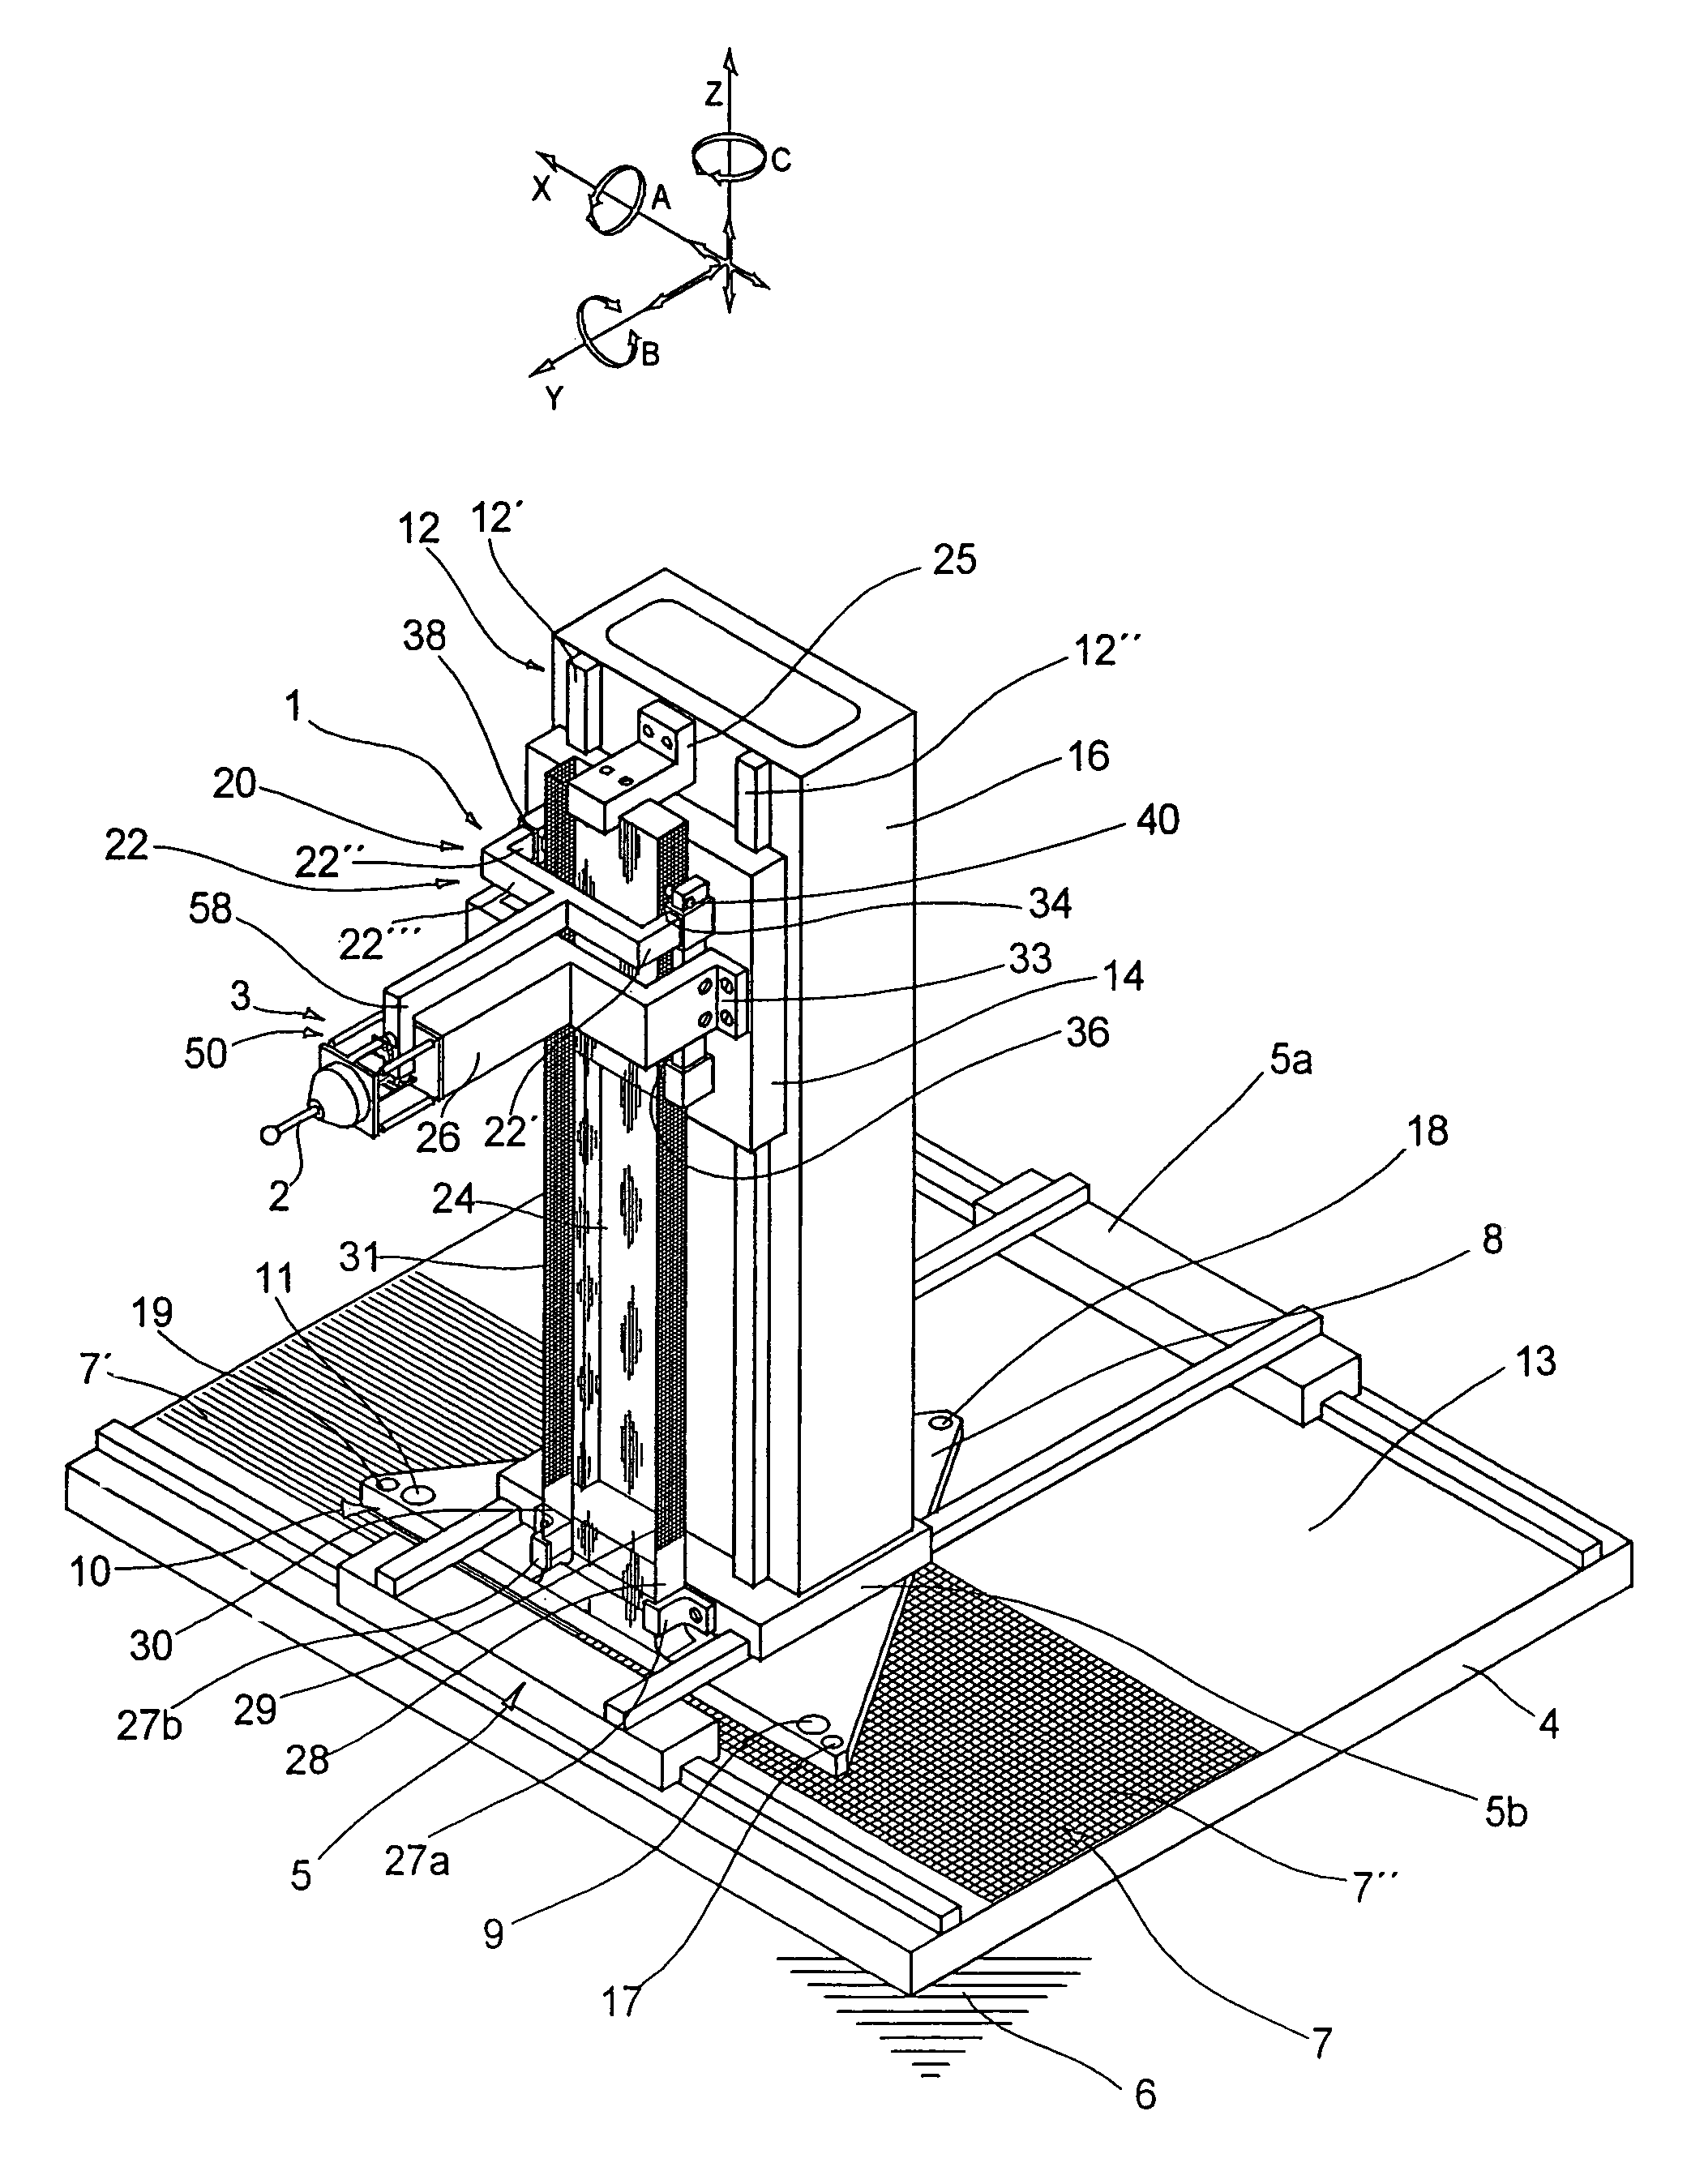 Apparatus for detecting the position of a probe element in a multi-coordinate measuring device